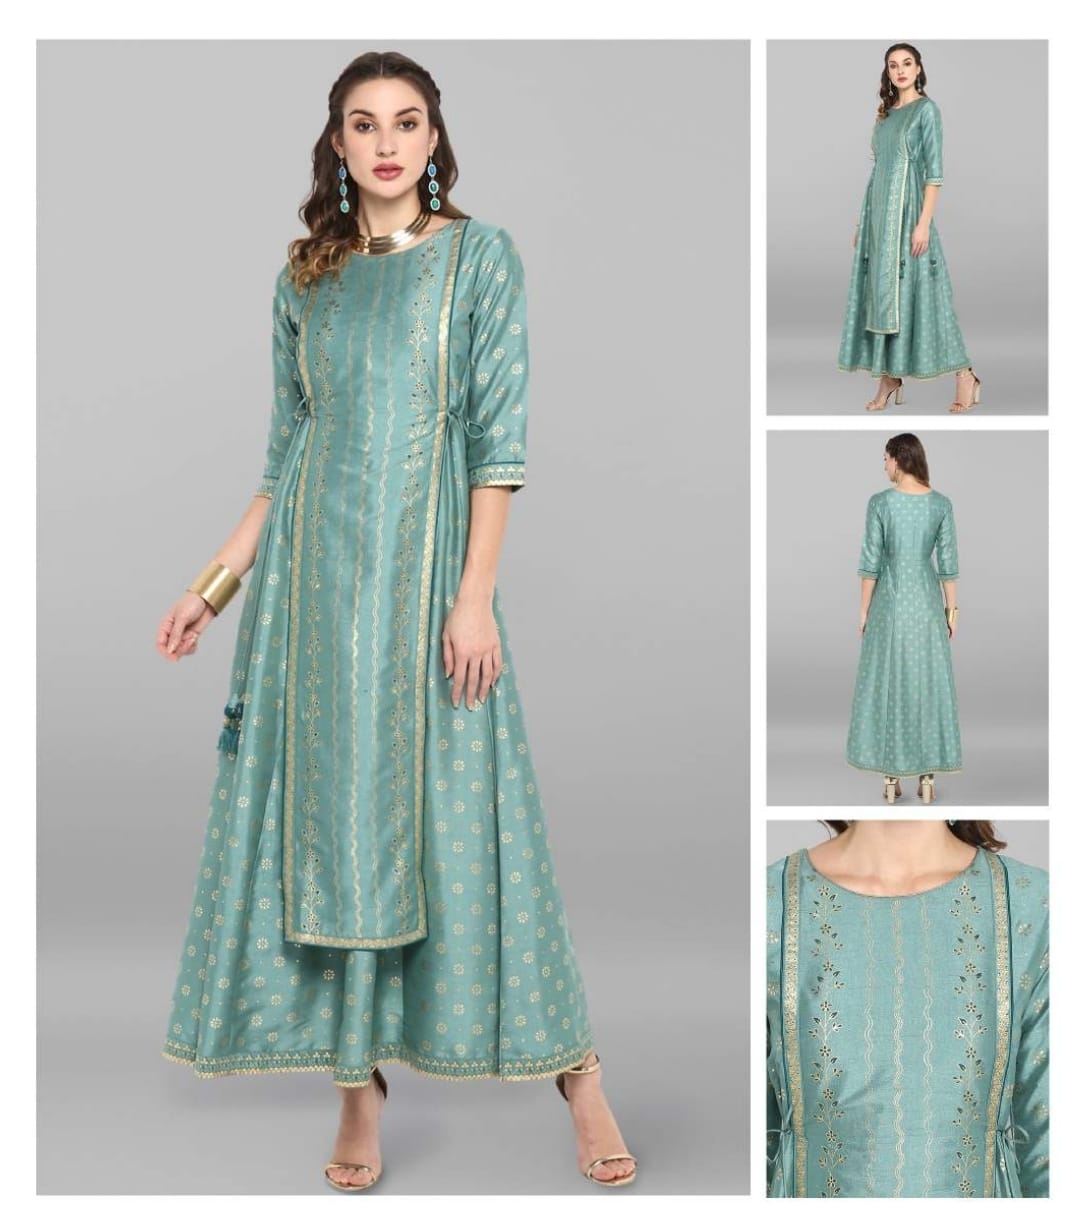 Crepe silk ethnic dress in pastel green with foil print